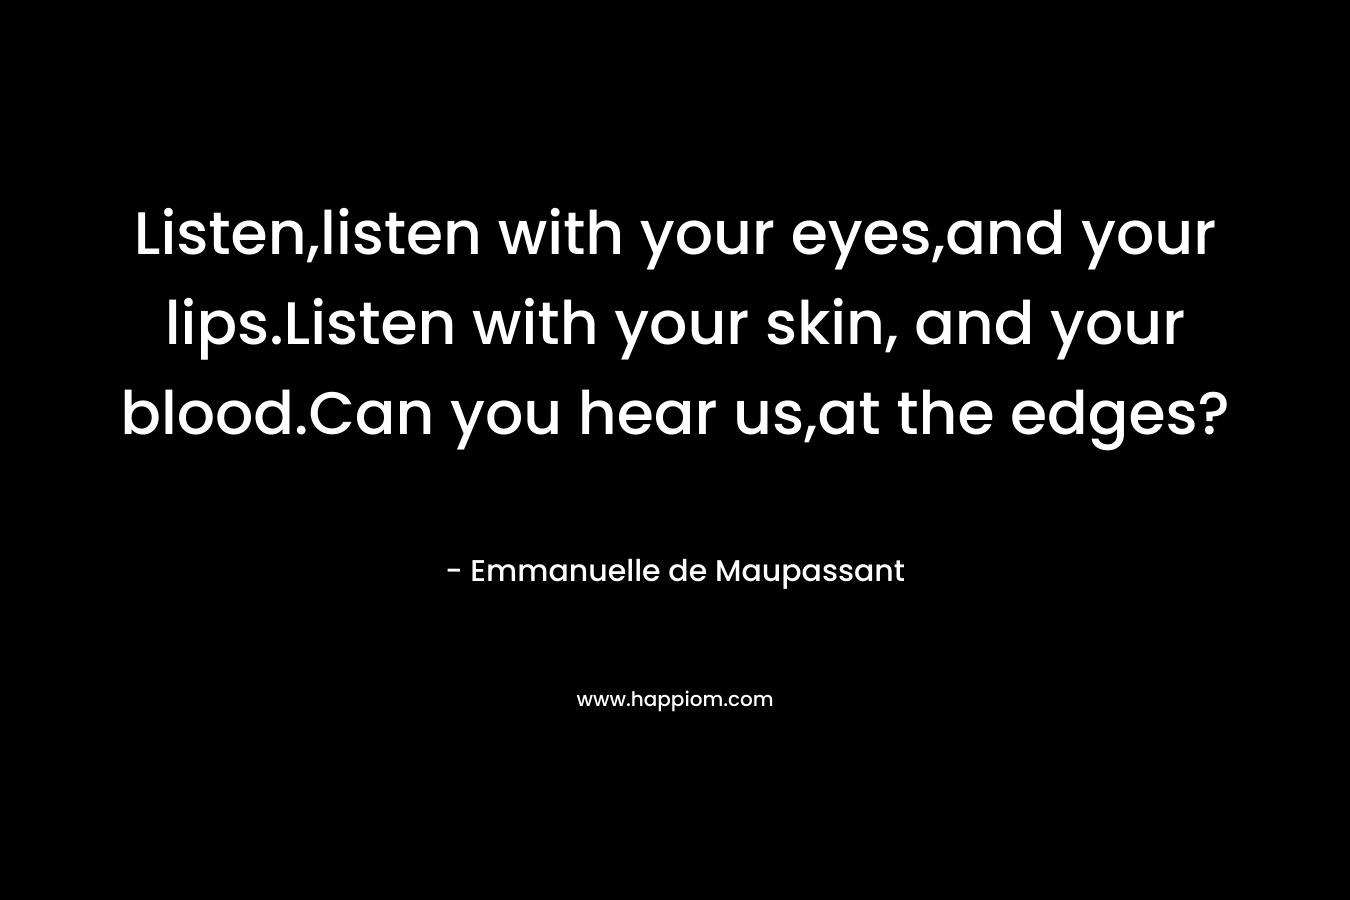 Listen,listen with your eyes,and your lips.Listen with your skin, and your blood.Can you hear us,at the edges? – Emmanuelle de Maupassant